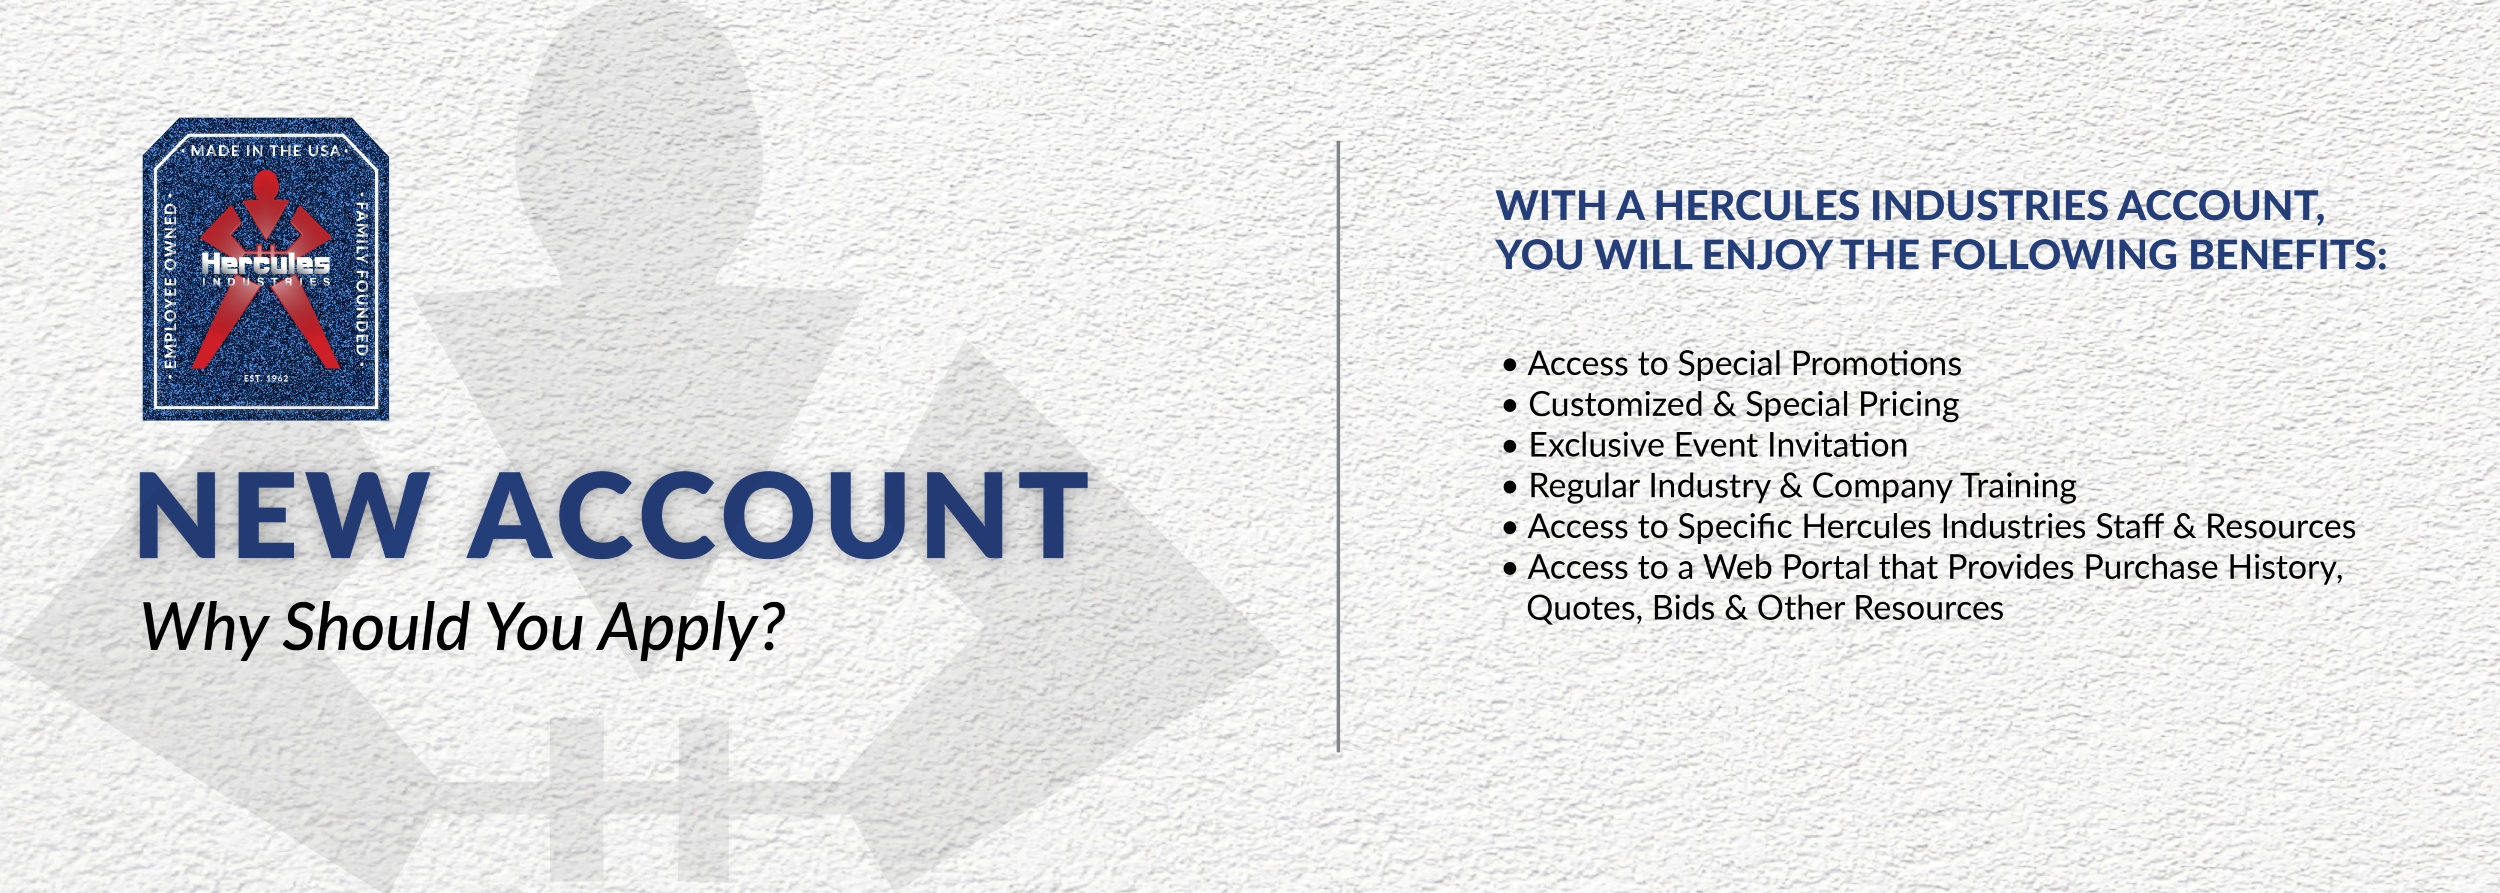 Benefits of Having an Account! Learn More